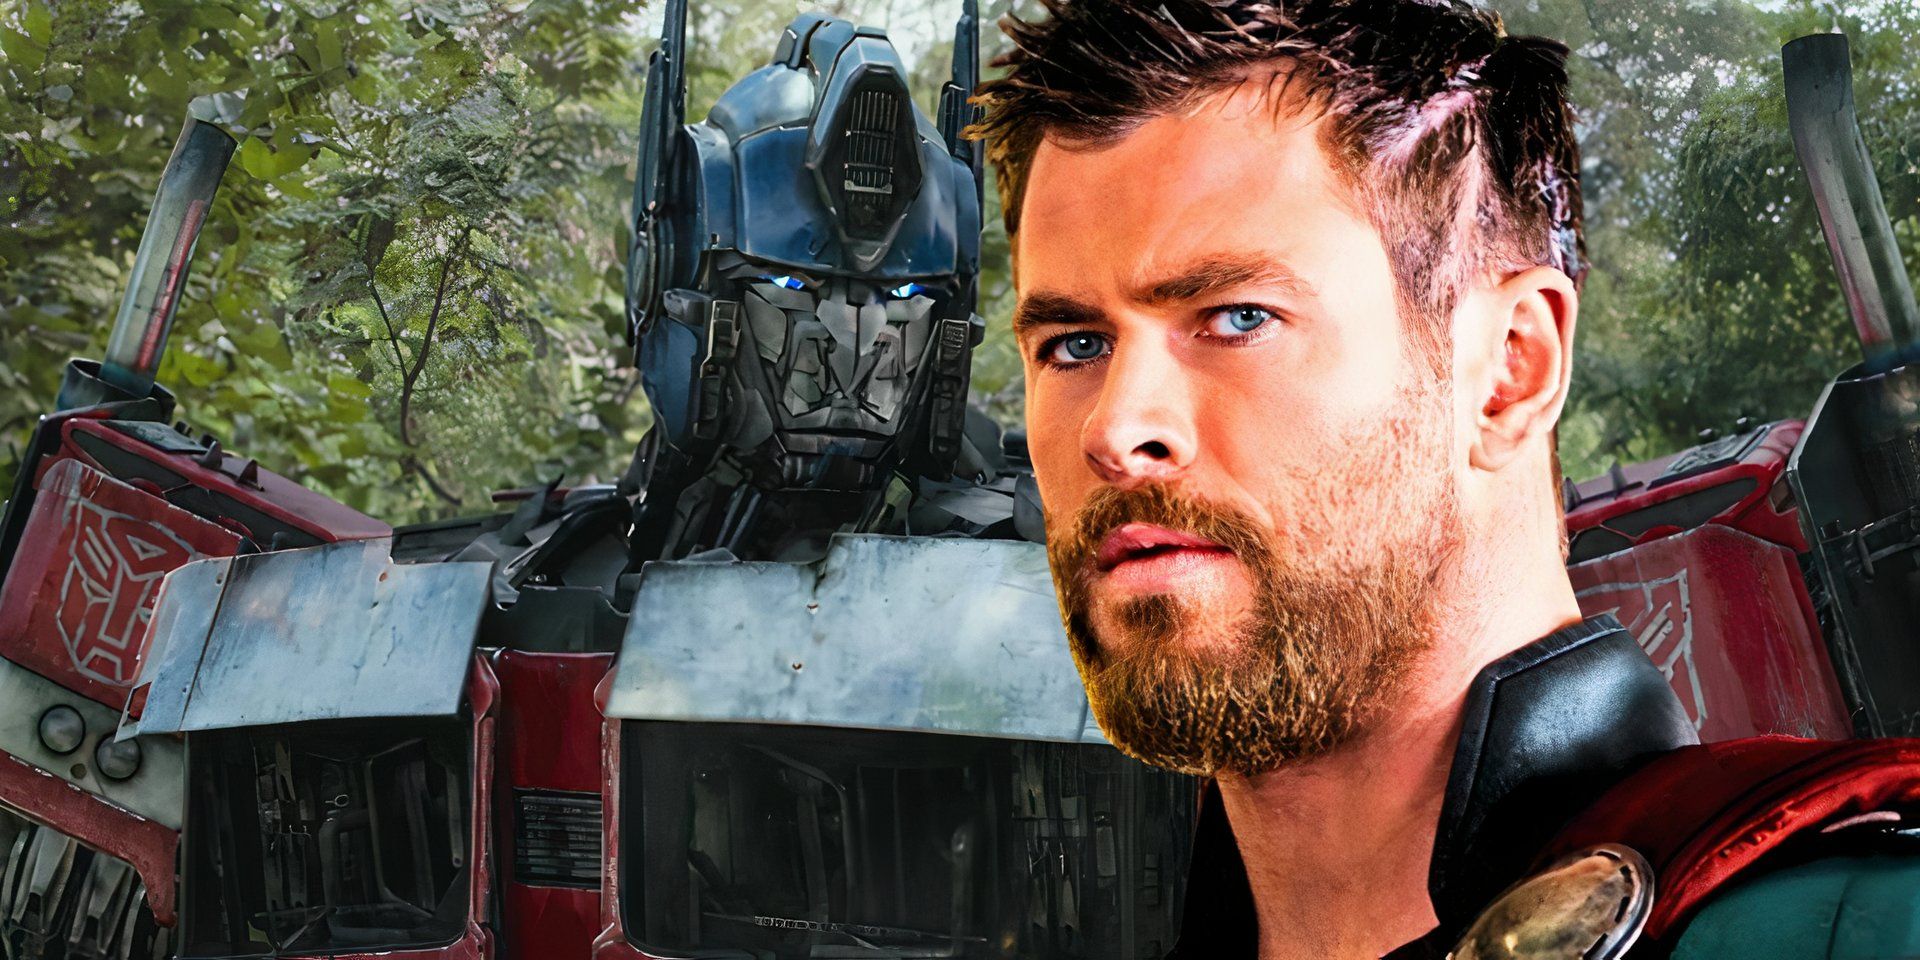 Optimus Prime looking down in Transformers Rise of the Beasts next to Chris Hemsworth as Thor looking serious in Thor Ragnarok